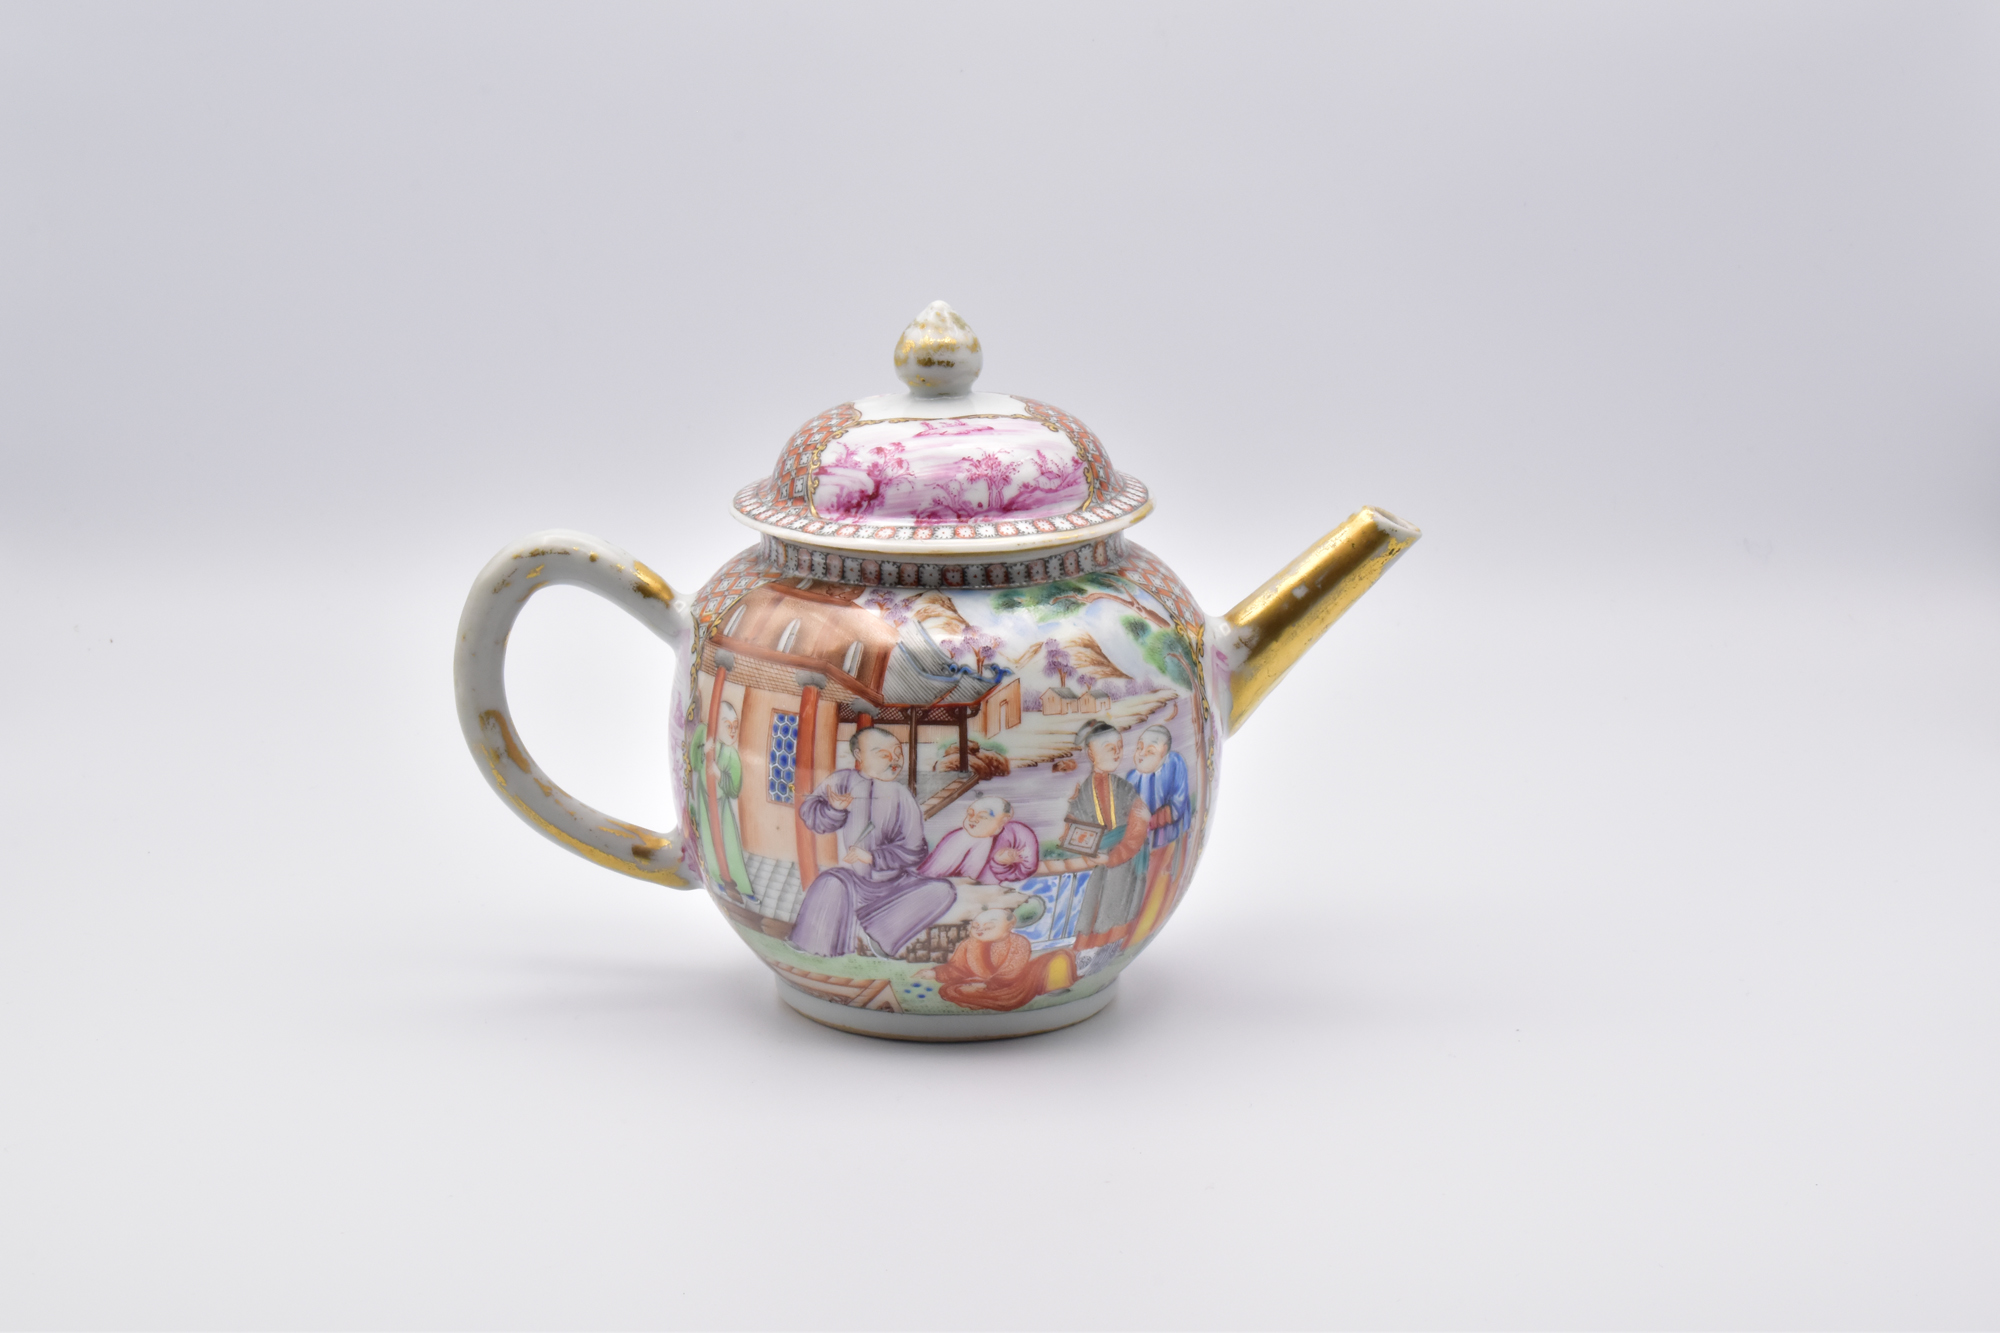 A CHINESE EXPORT ‘FAMILLE-ROSE’ PORCELAIN TEAPOT AND COVER, QIANLONG PERIOD, 1736 – 1795